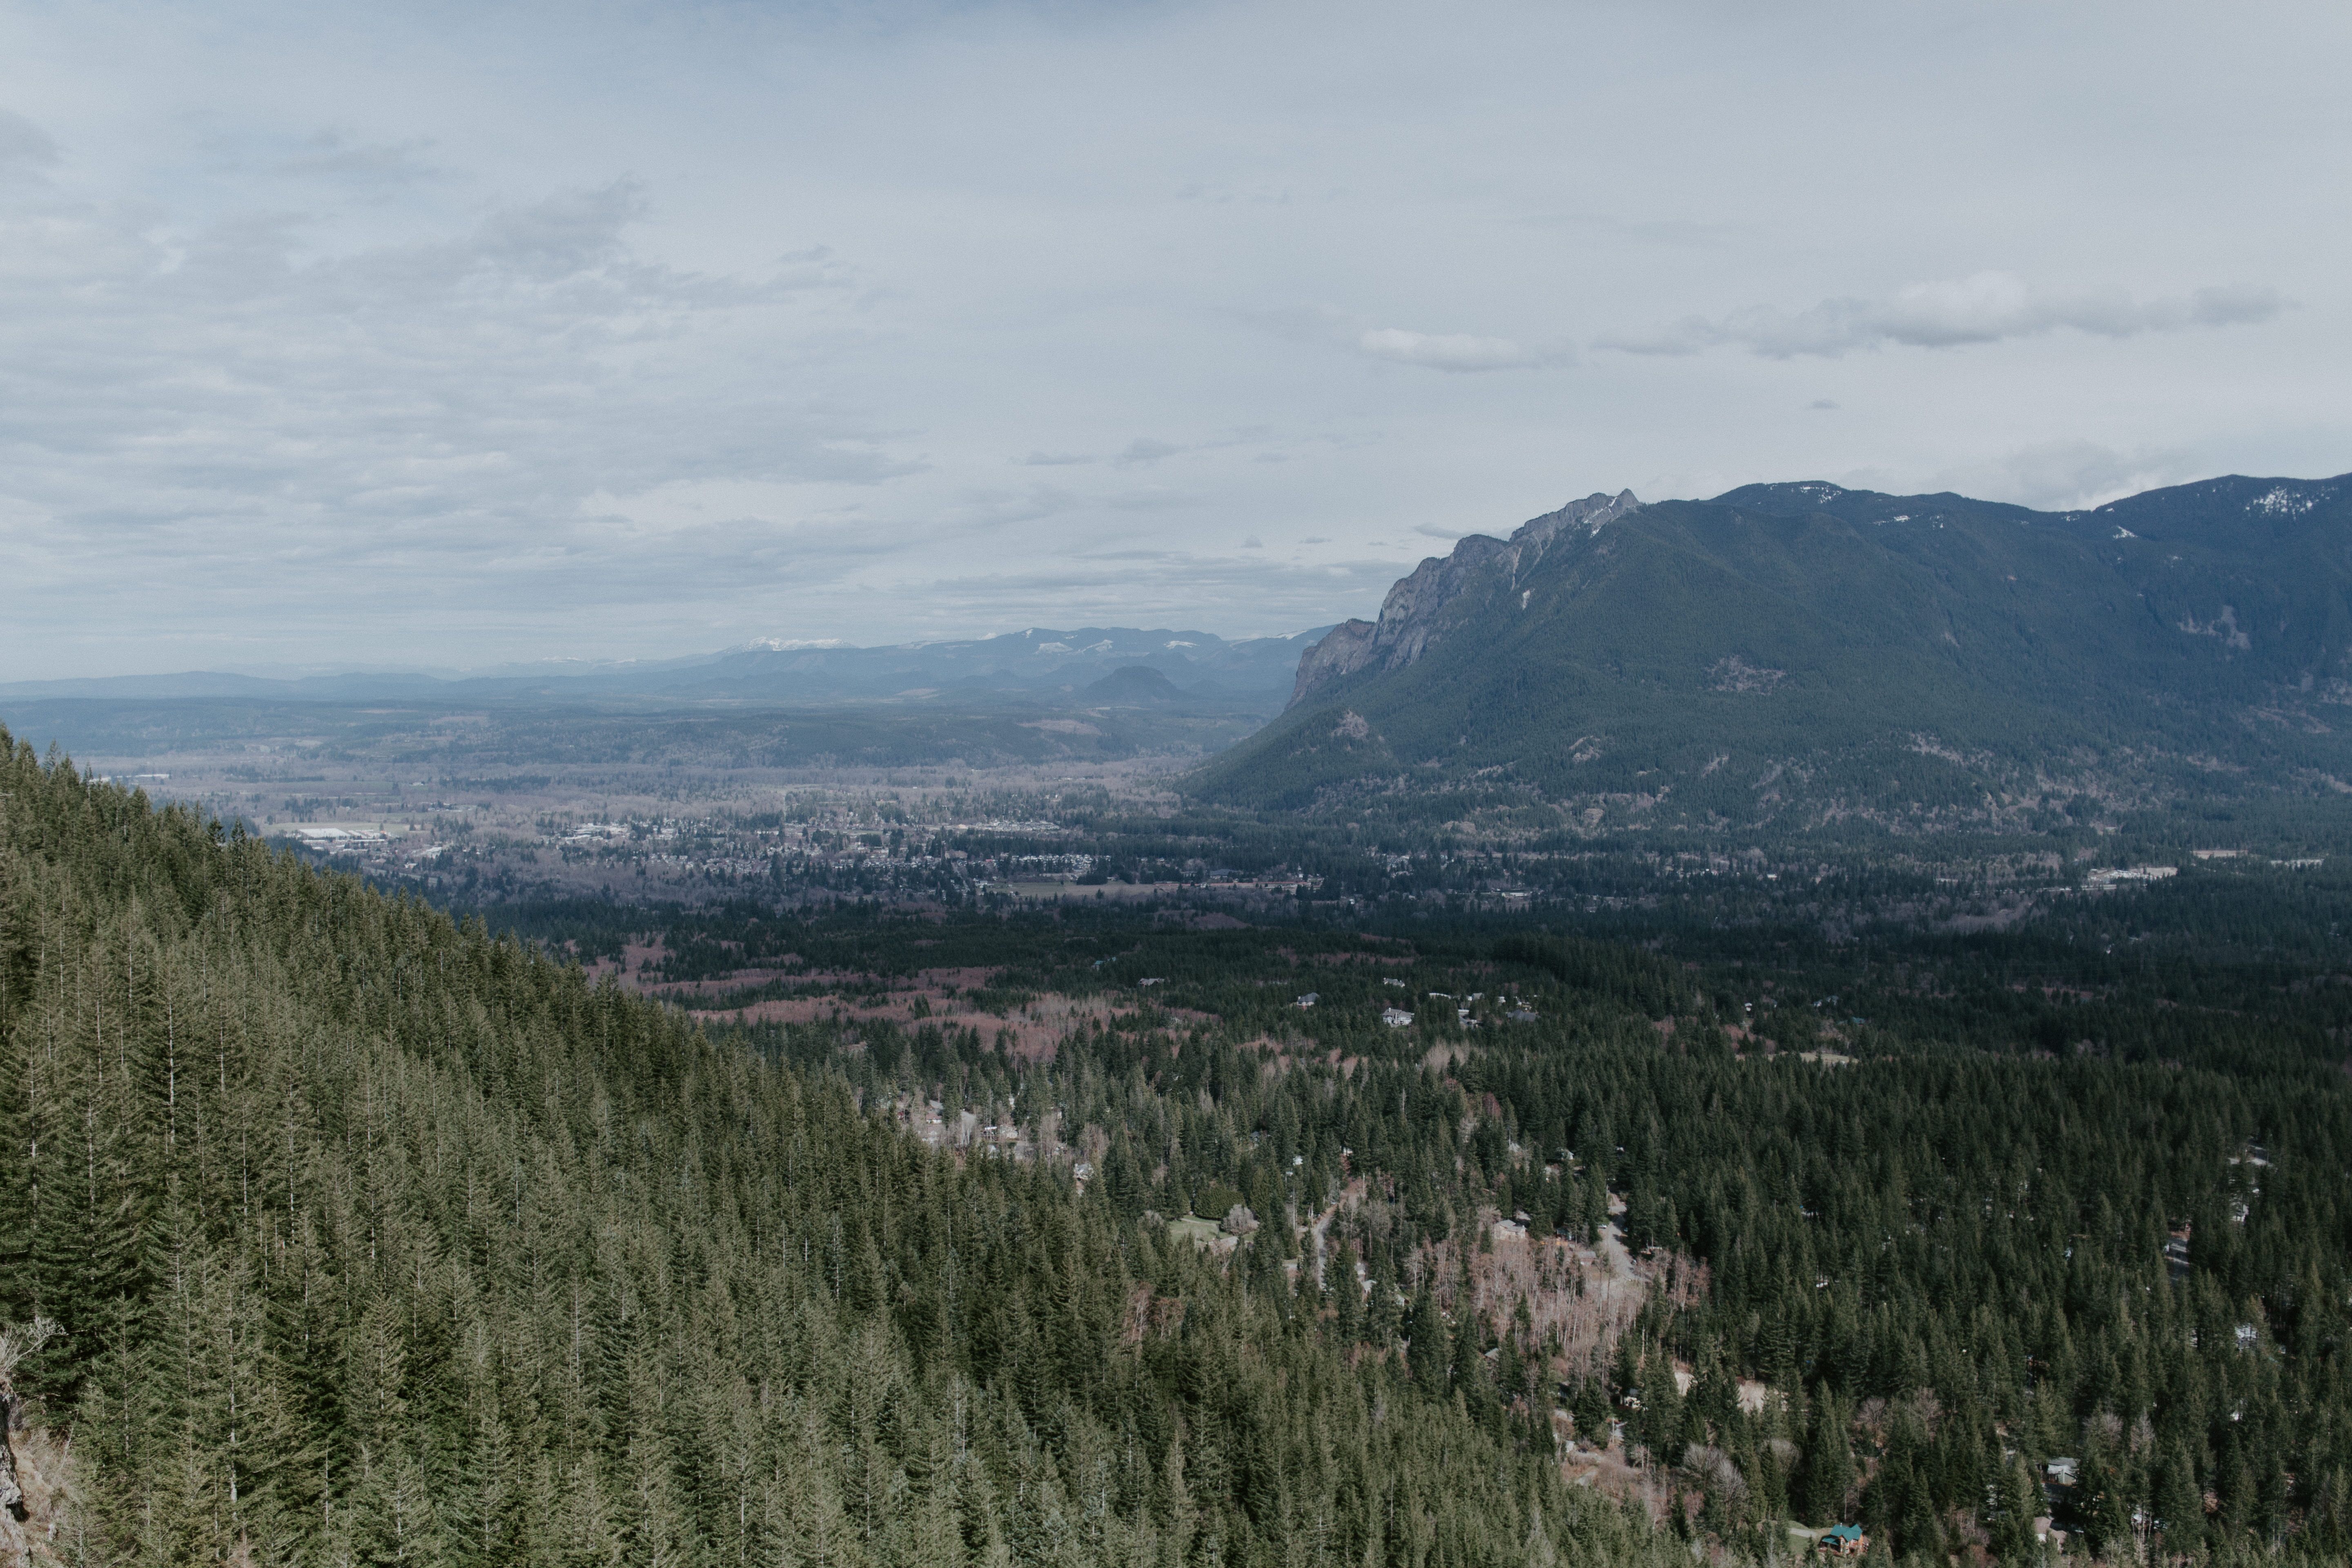 The view from Rattlesnake Ledge cliff out onto the state of Washington. Elopement adventure shoot at Rattlesnake Ledge, Washington.